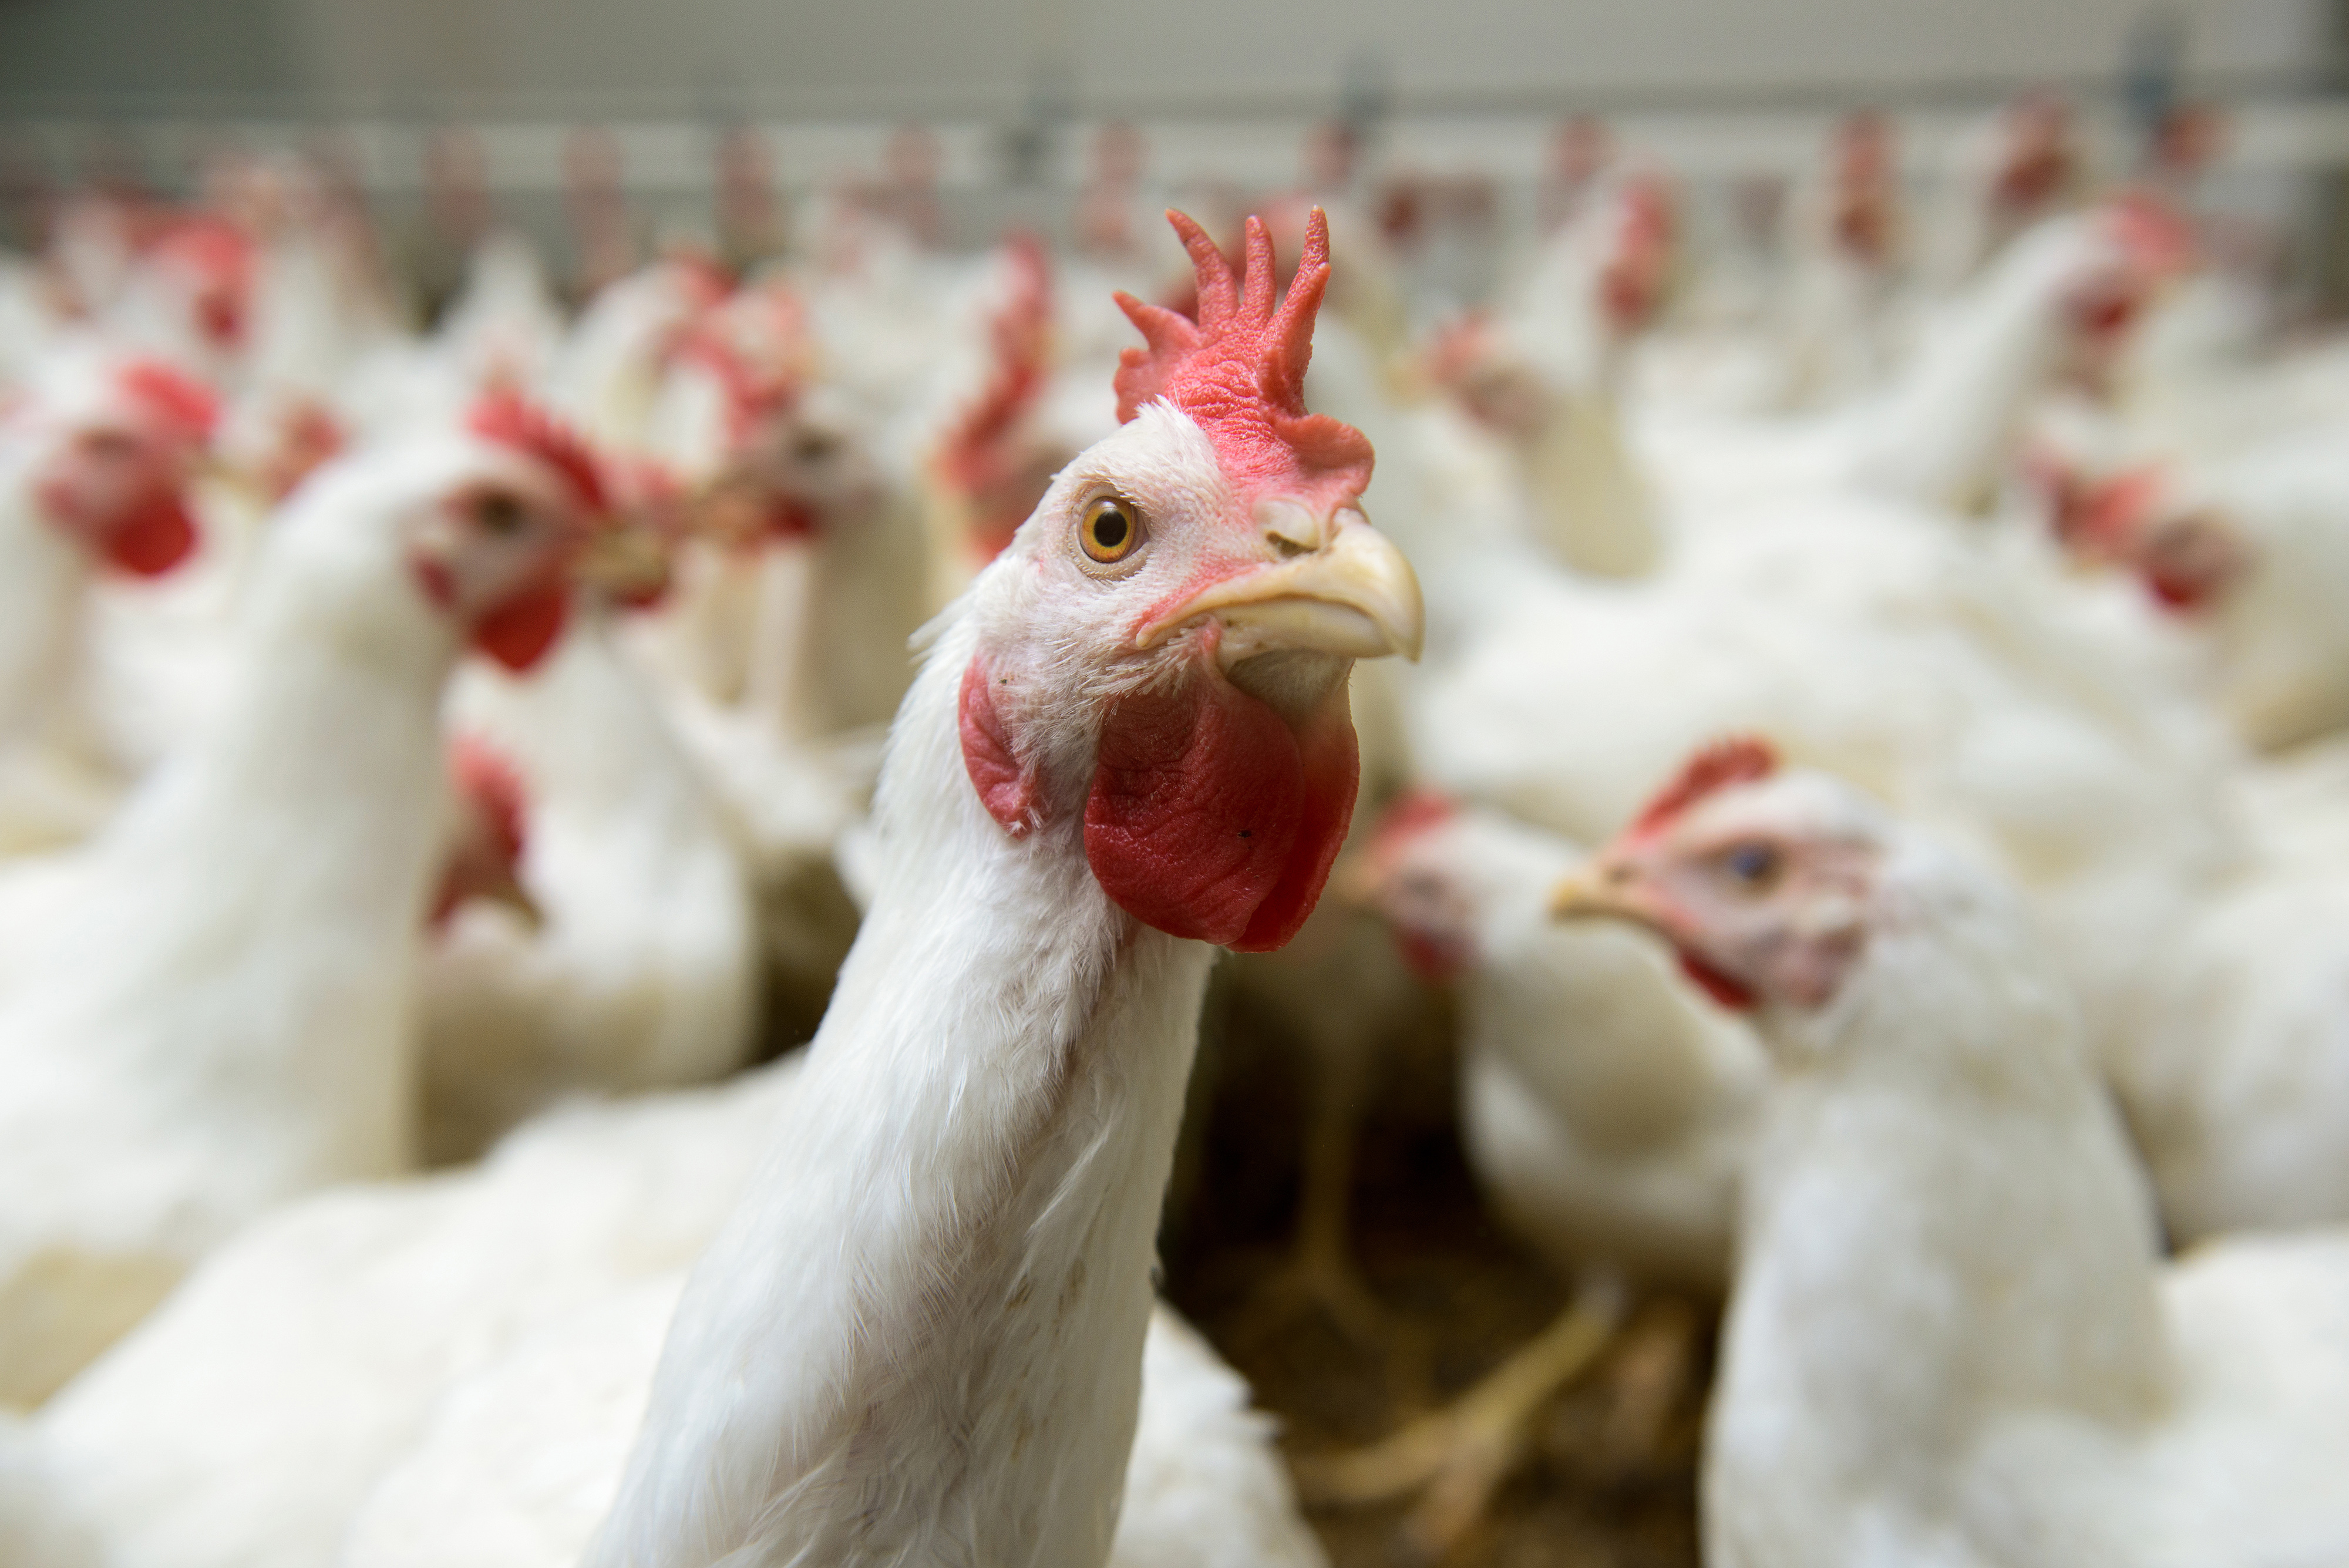 white-chickens-in poultry-house-closeup.jpg